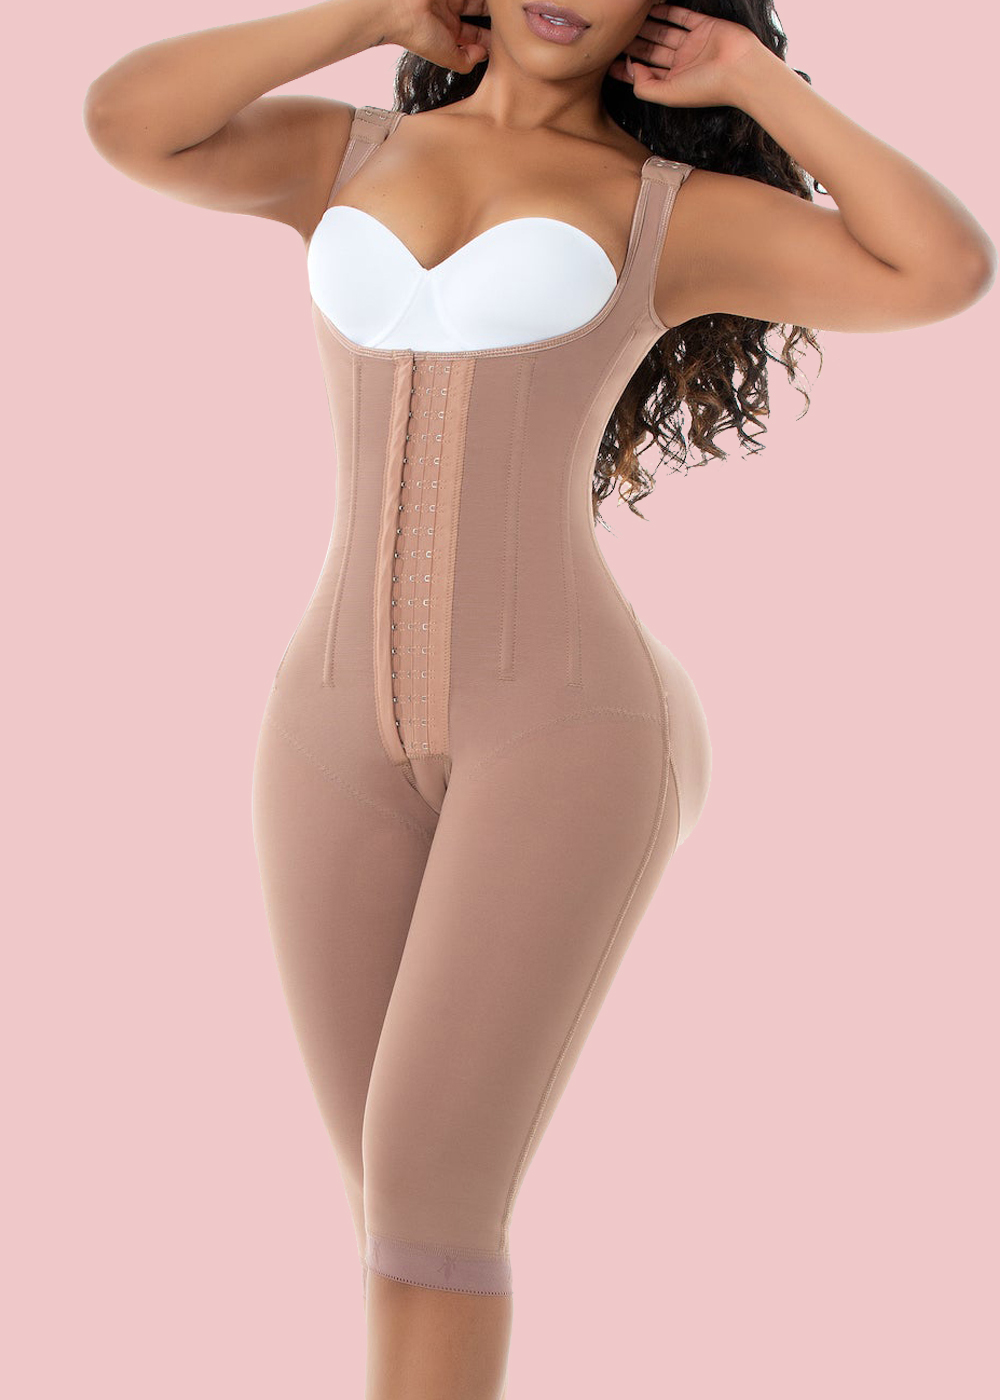 Postpartum Full Body Shaper Removable Bra With Snap Closure